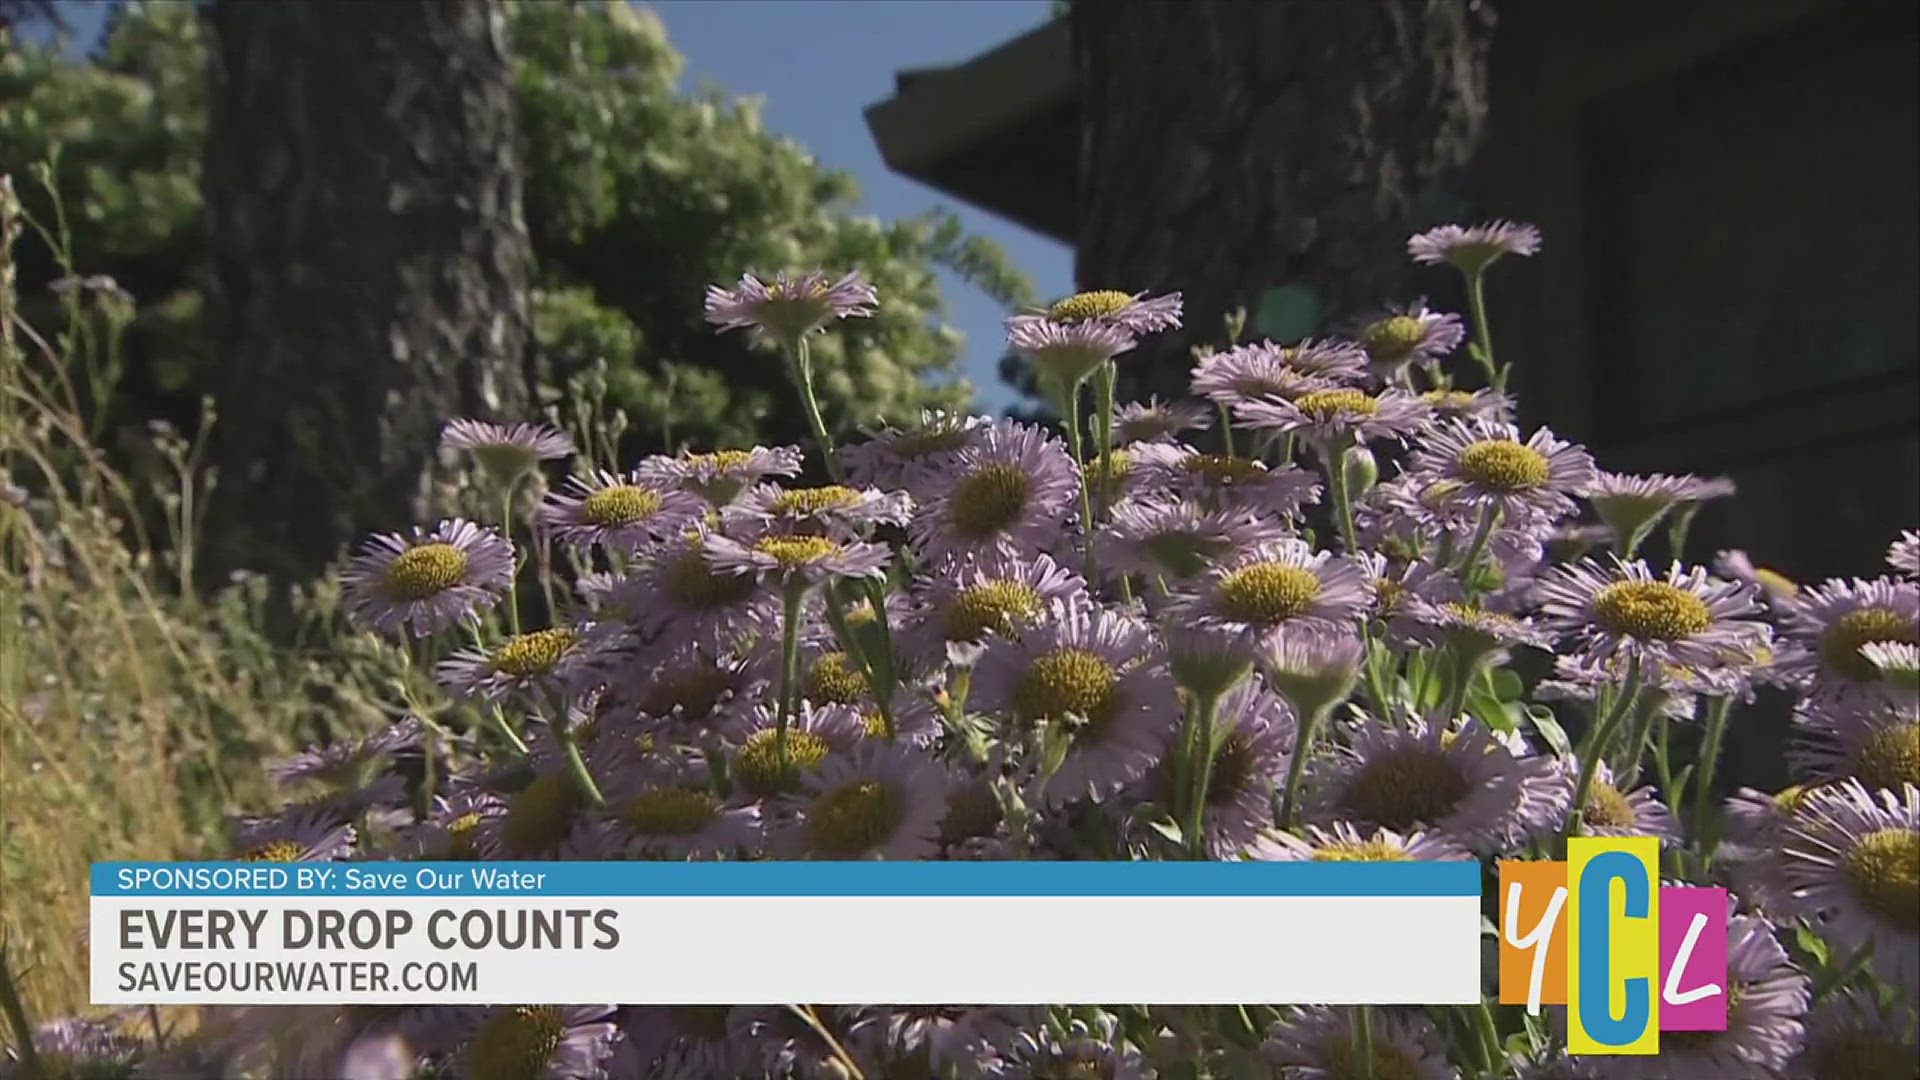 Water conservation can be something as simple as changing the way we garden and can have a huge impact! This segment is paid by Save Our Water.